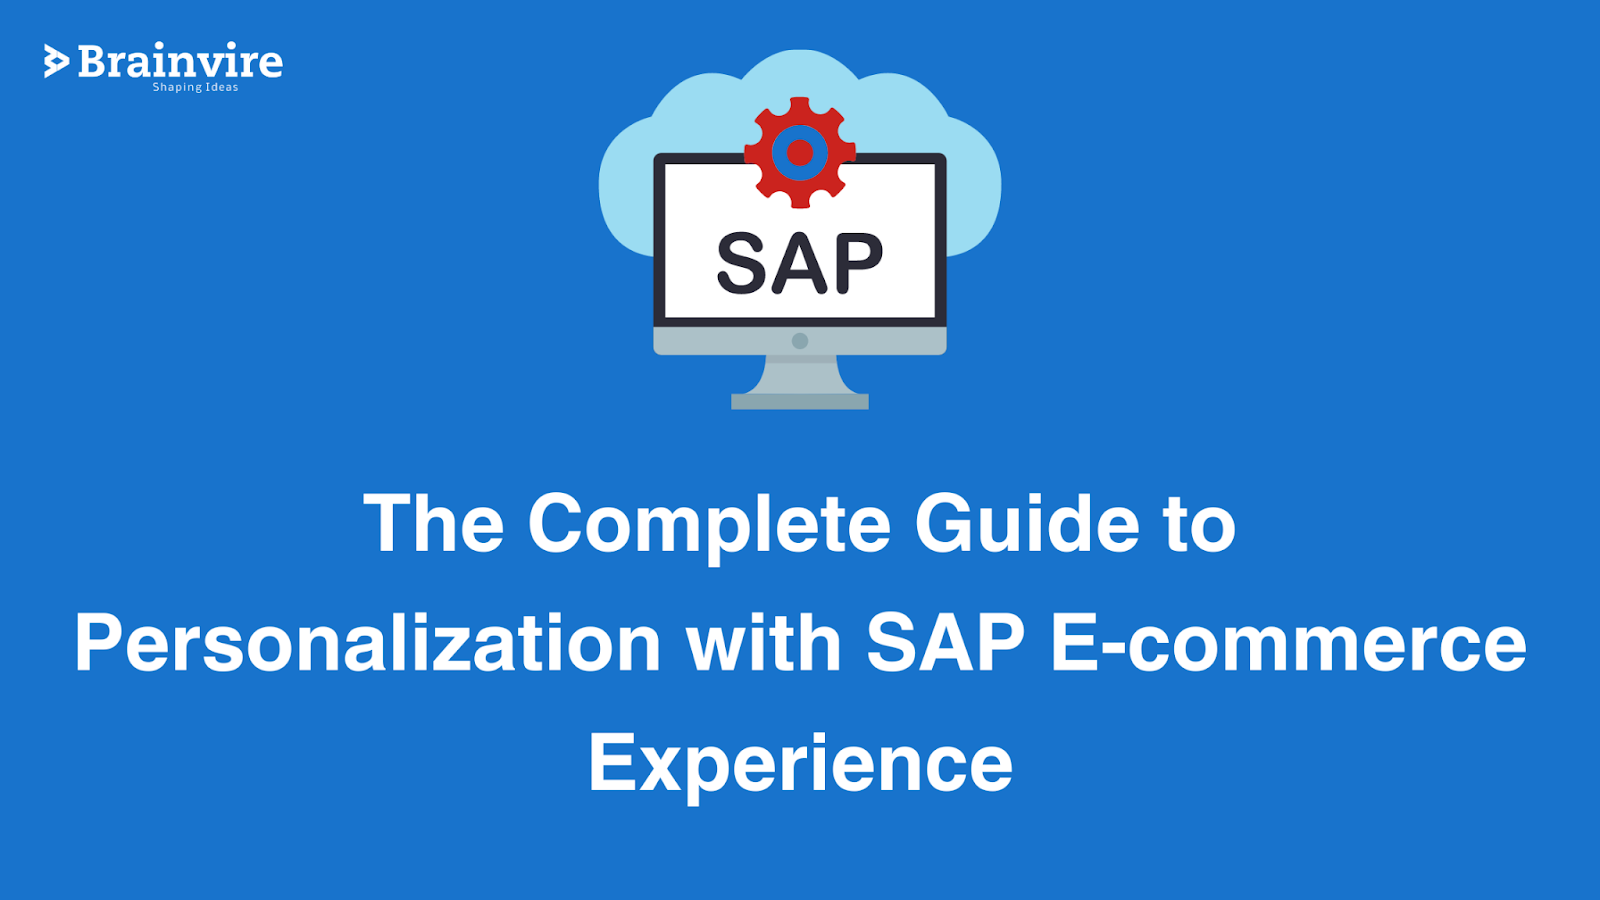 The Complete Guide to Personalization with SAP E-commerce Experience